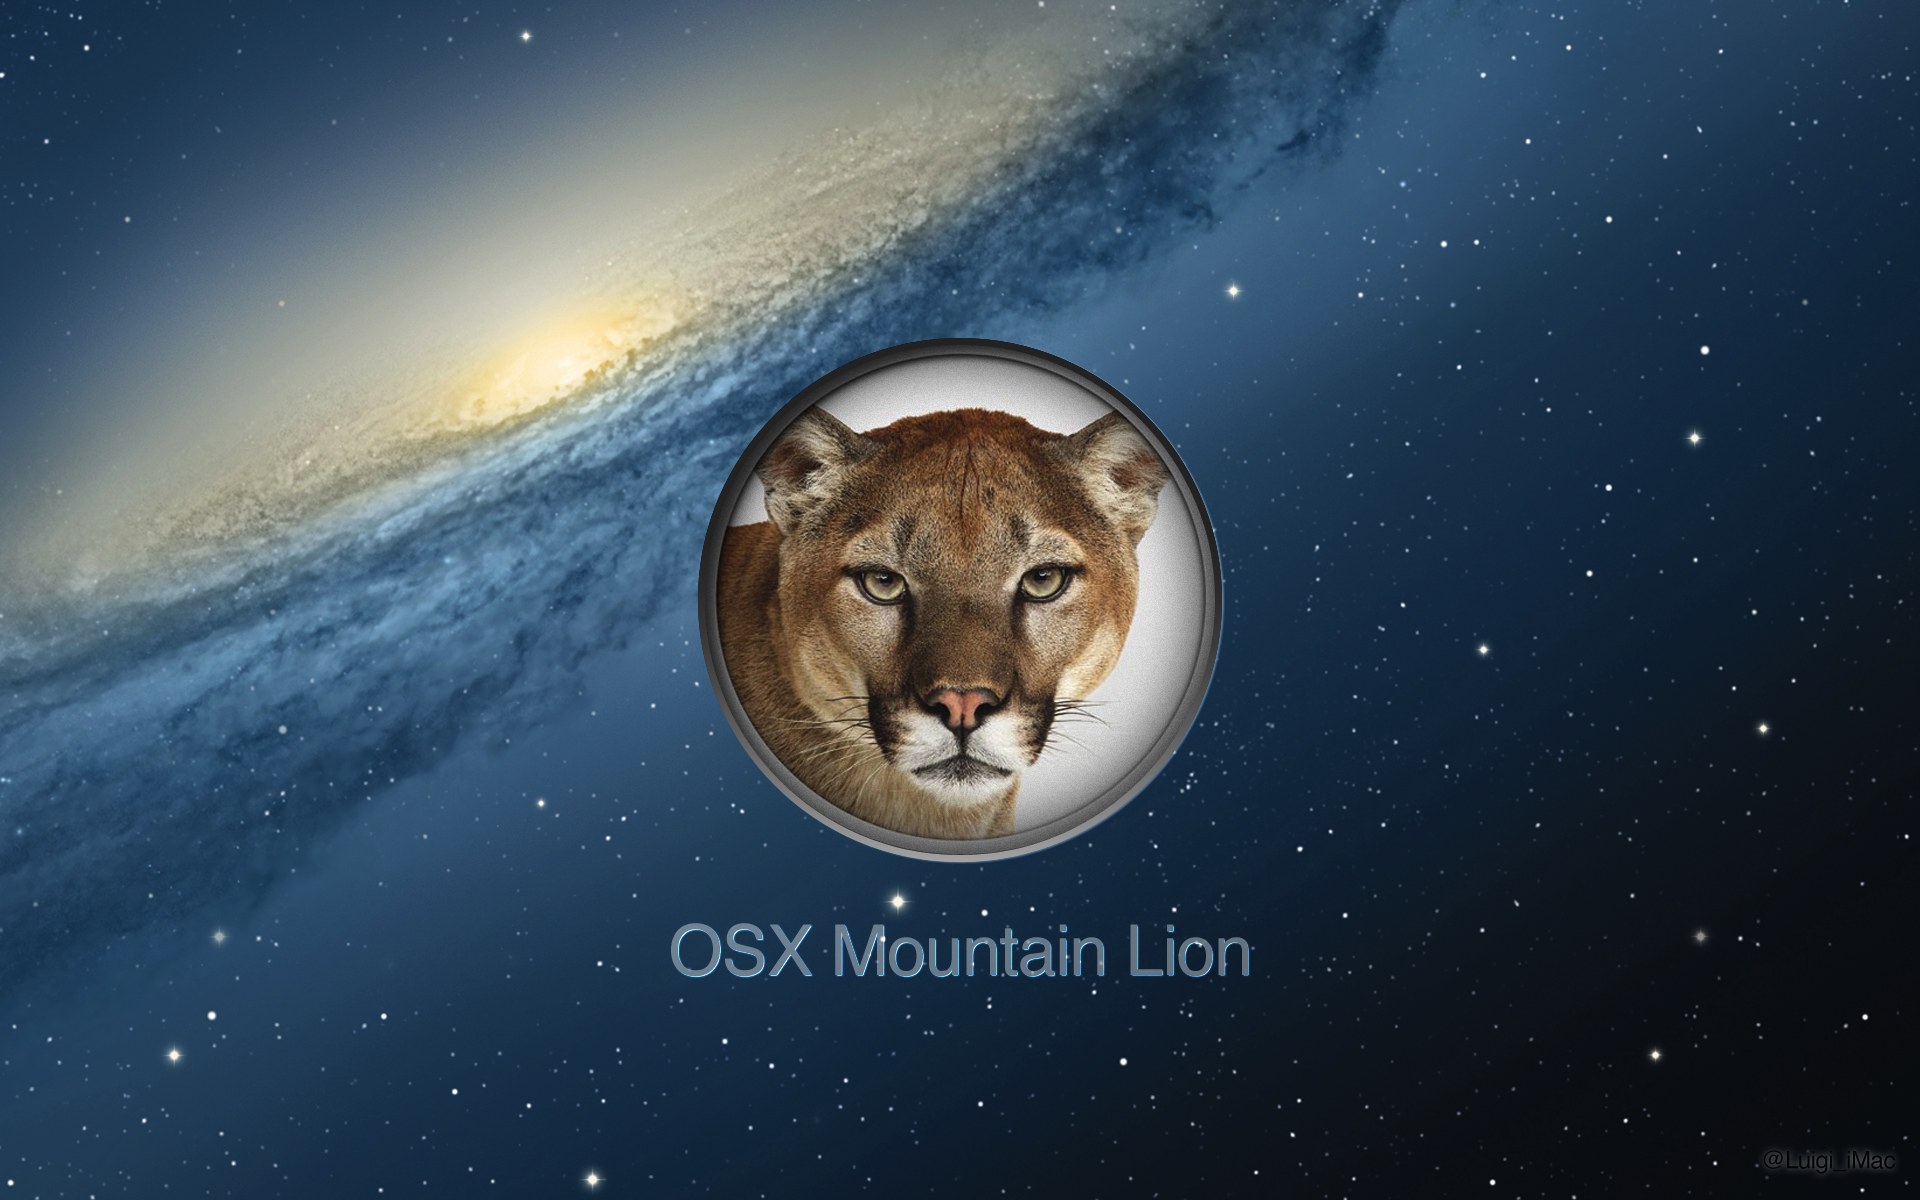 Very Nice Os X Mountain Lion Desktop Picture Collect It At Tapscape